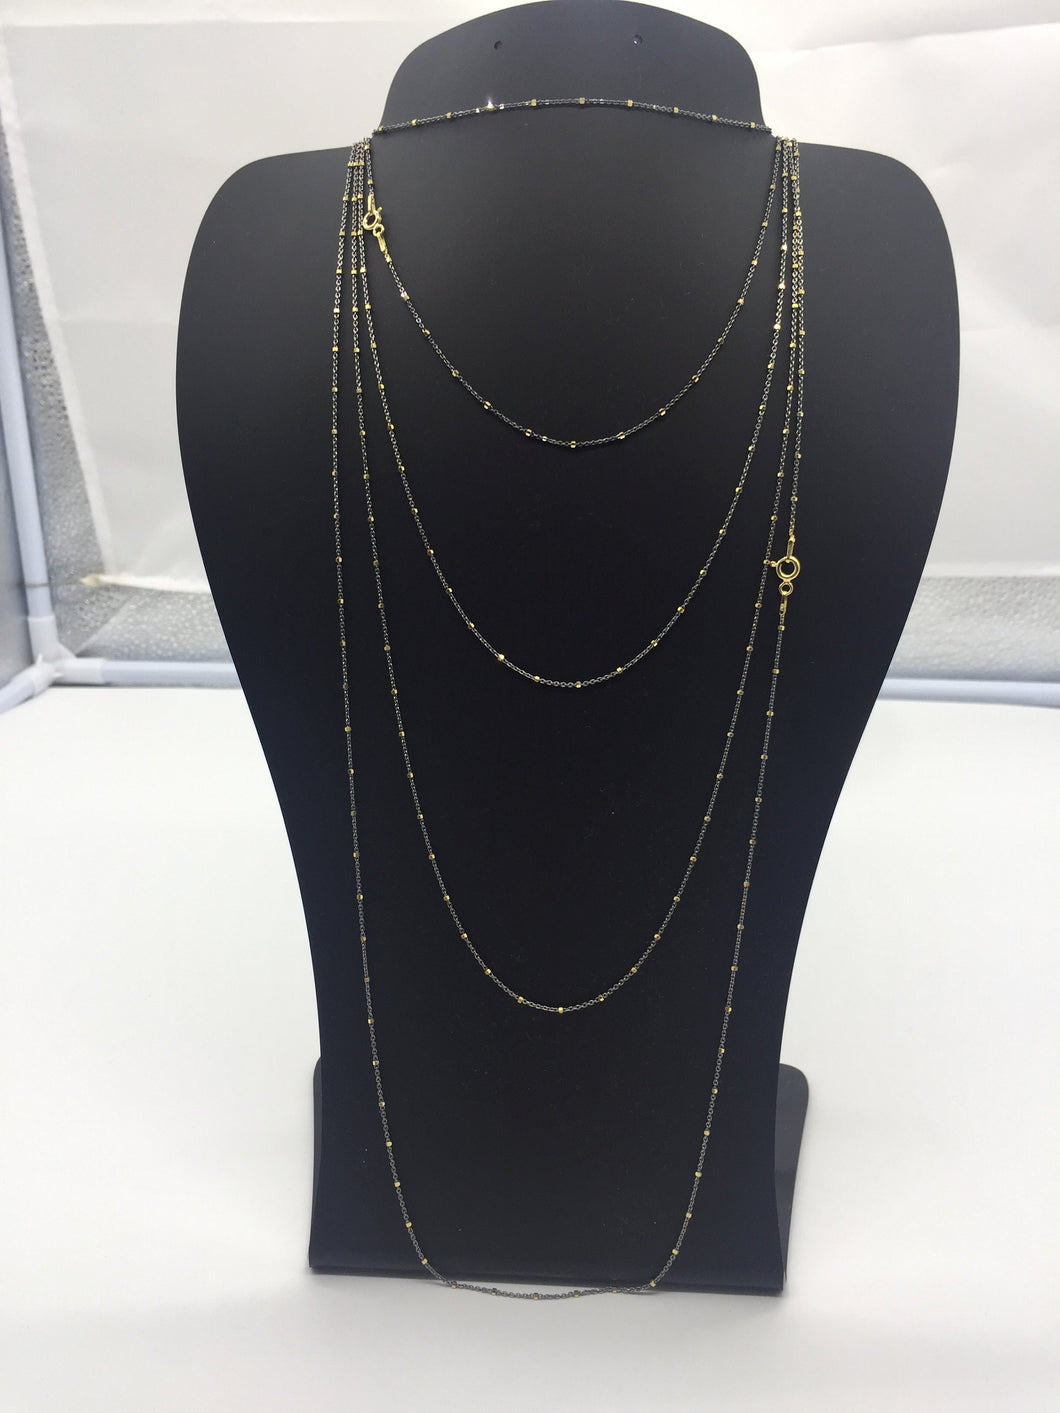 Gold filled chain,sterling silver chain,925 silver chain,sterling chain,oxodize chain,gold filled oxodize chain